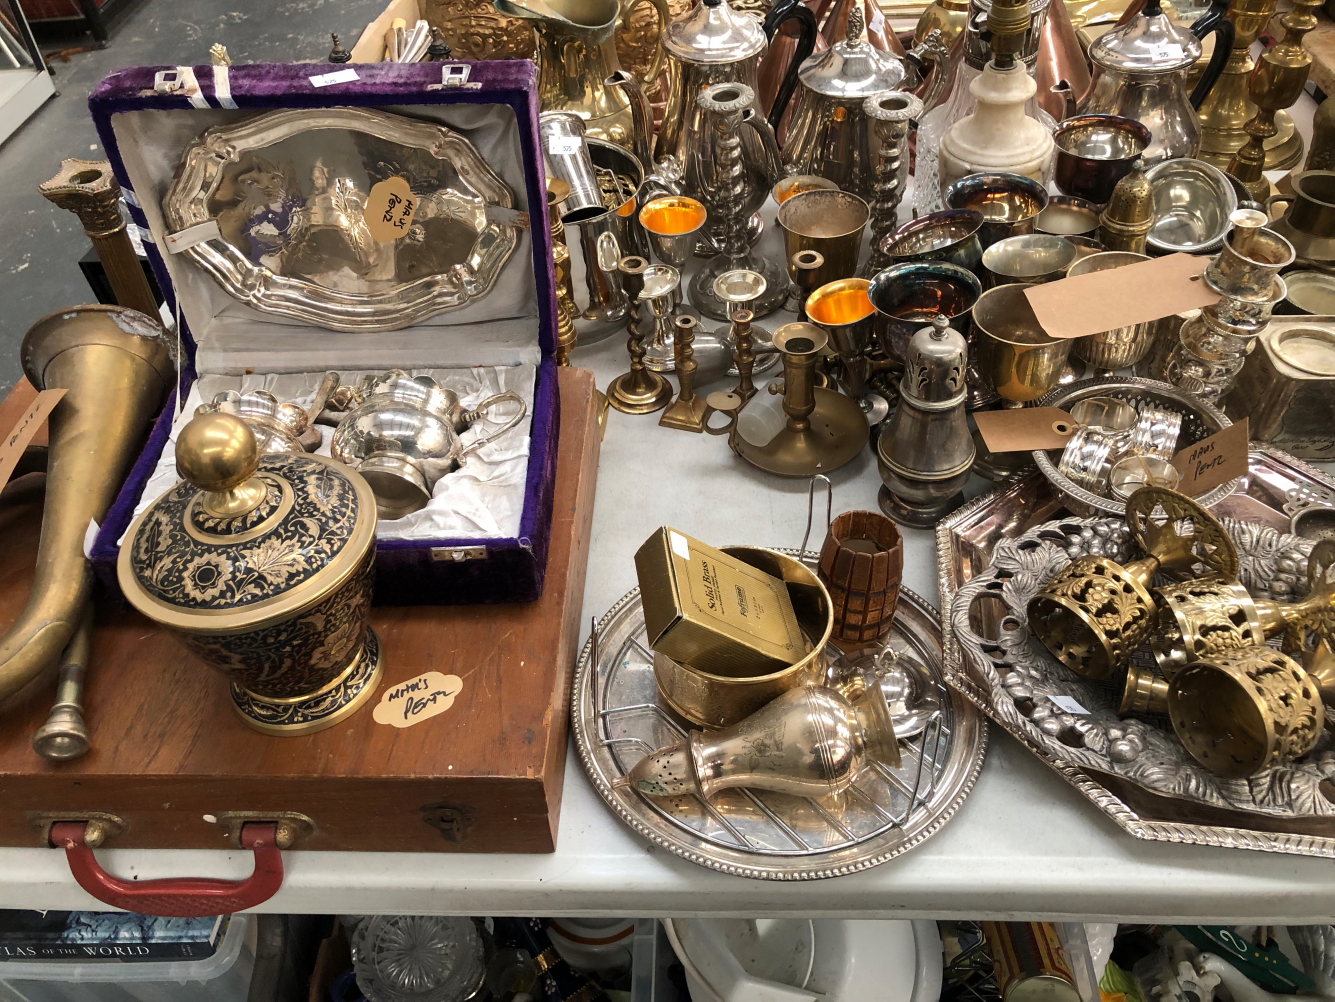 BRASS WARES, TO INCLUDE CANDLESTICKS, BELLS AND JUGS, ELECTROPLATE, TO INCLUDE CANDELABRA, TEA AND